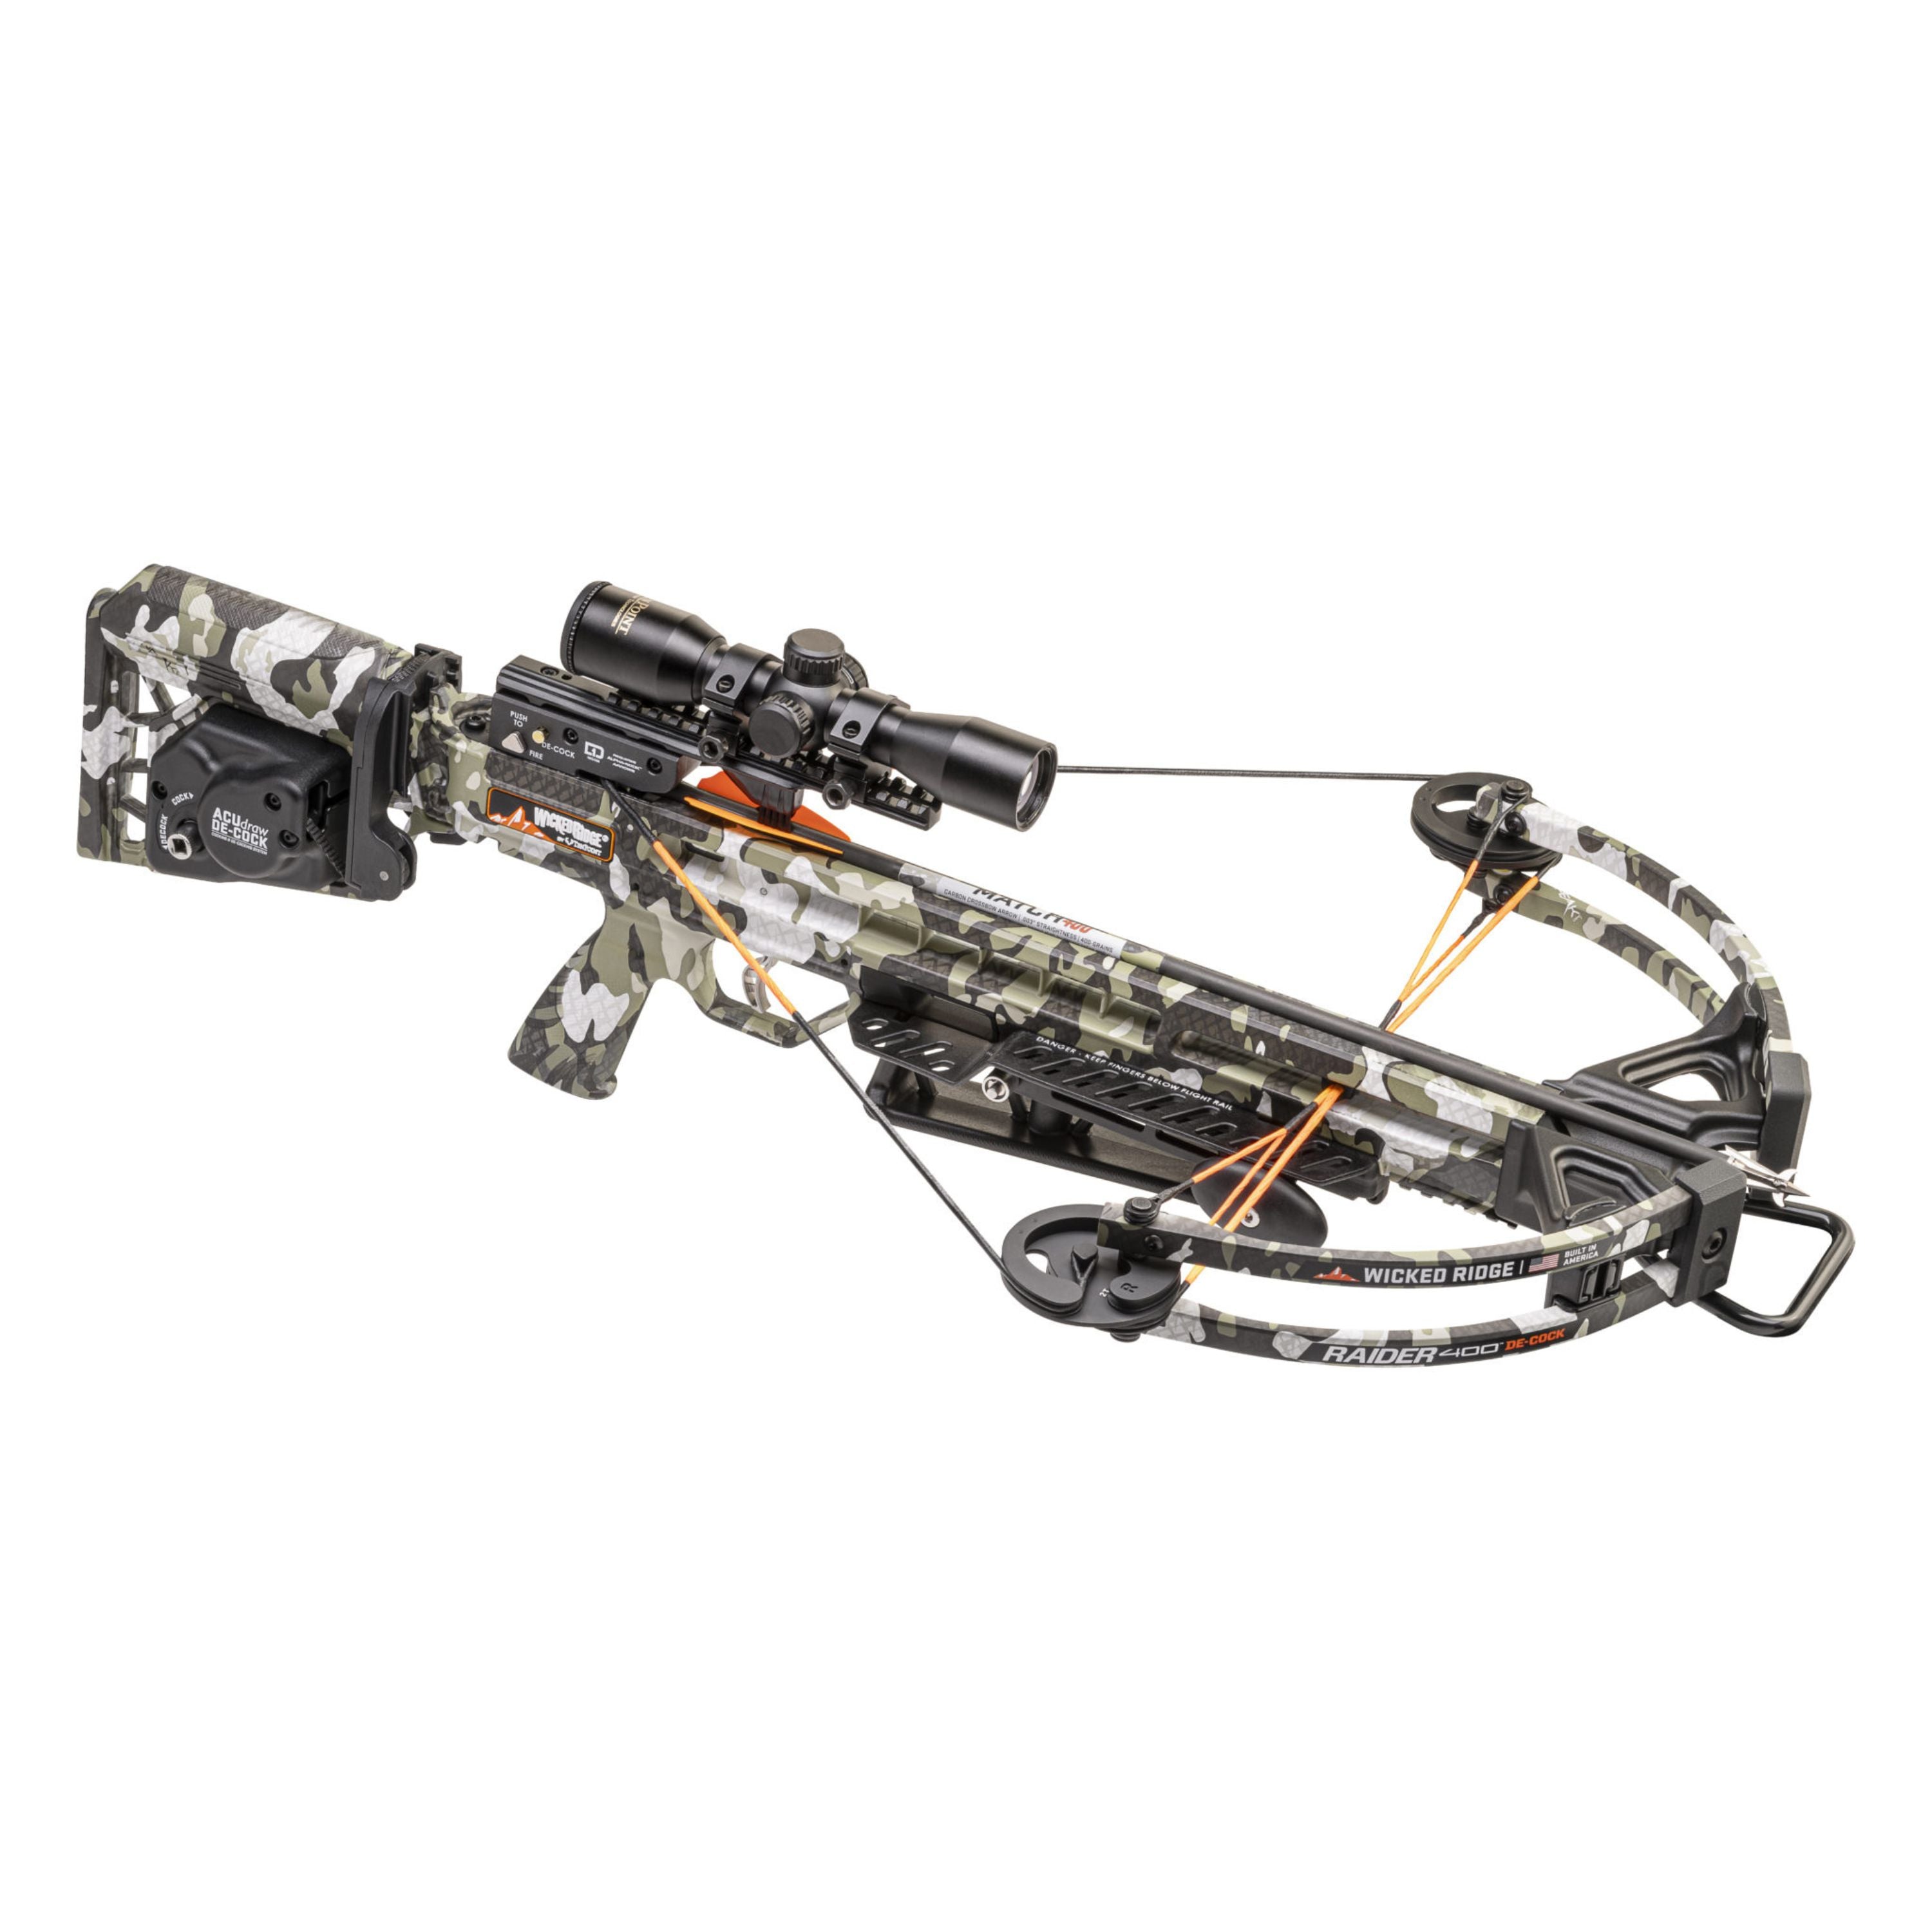 Raider 400 De-cock crossbow with acudraw and scope — Groupe Pronature